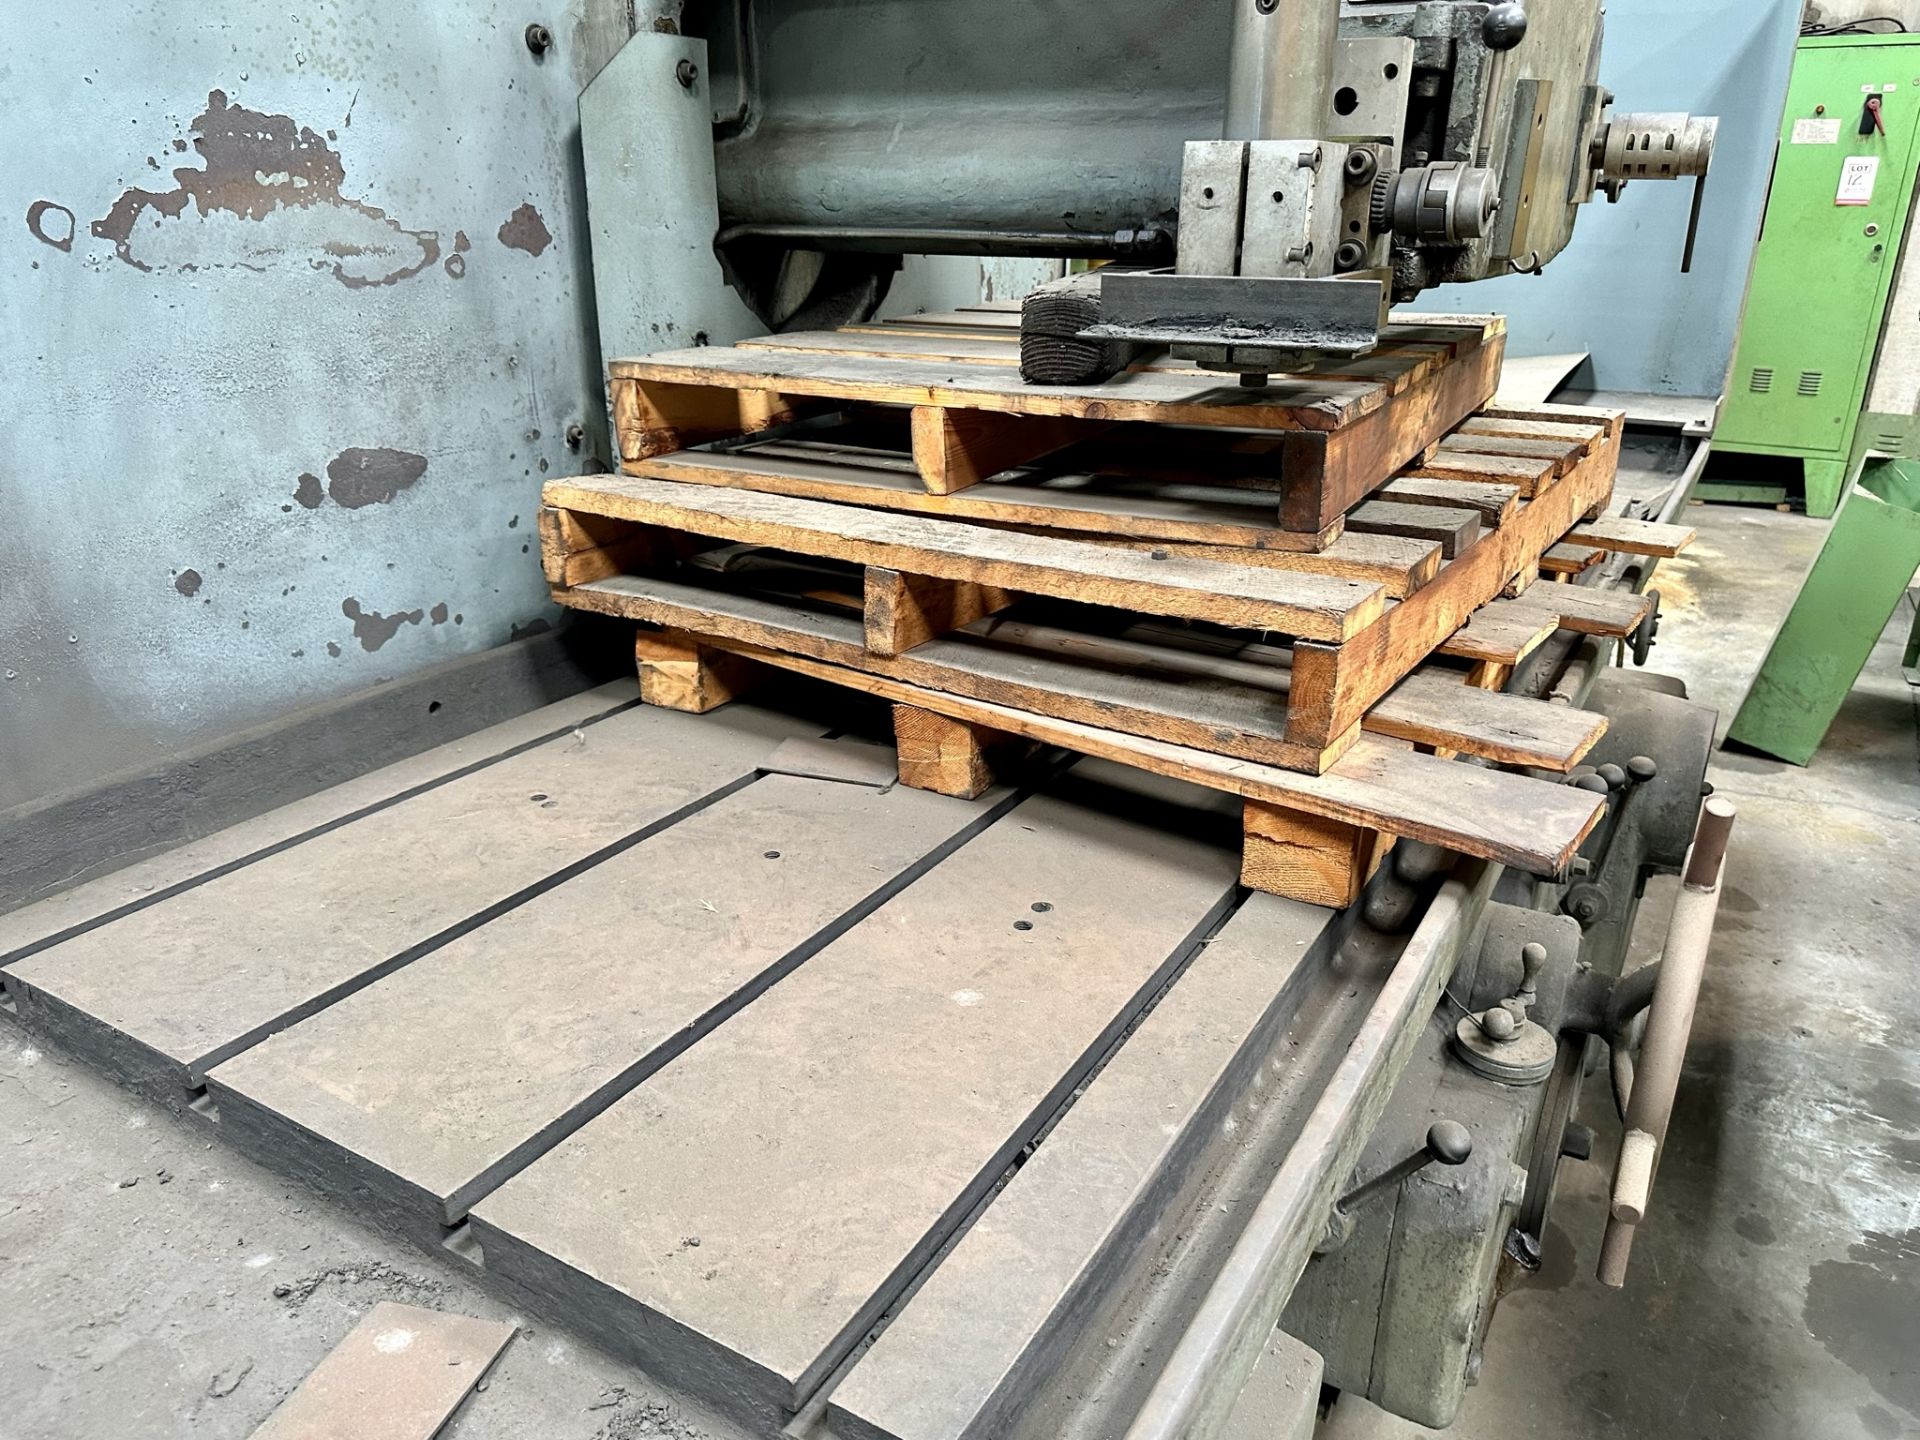 MATTISON SURFACE GRINDER, 104" X 36" WORKING SURFACE, USED, (LOCATION: SANTA FE SPRINGS, CA) - Image 6 of 10